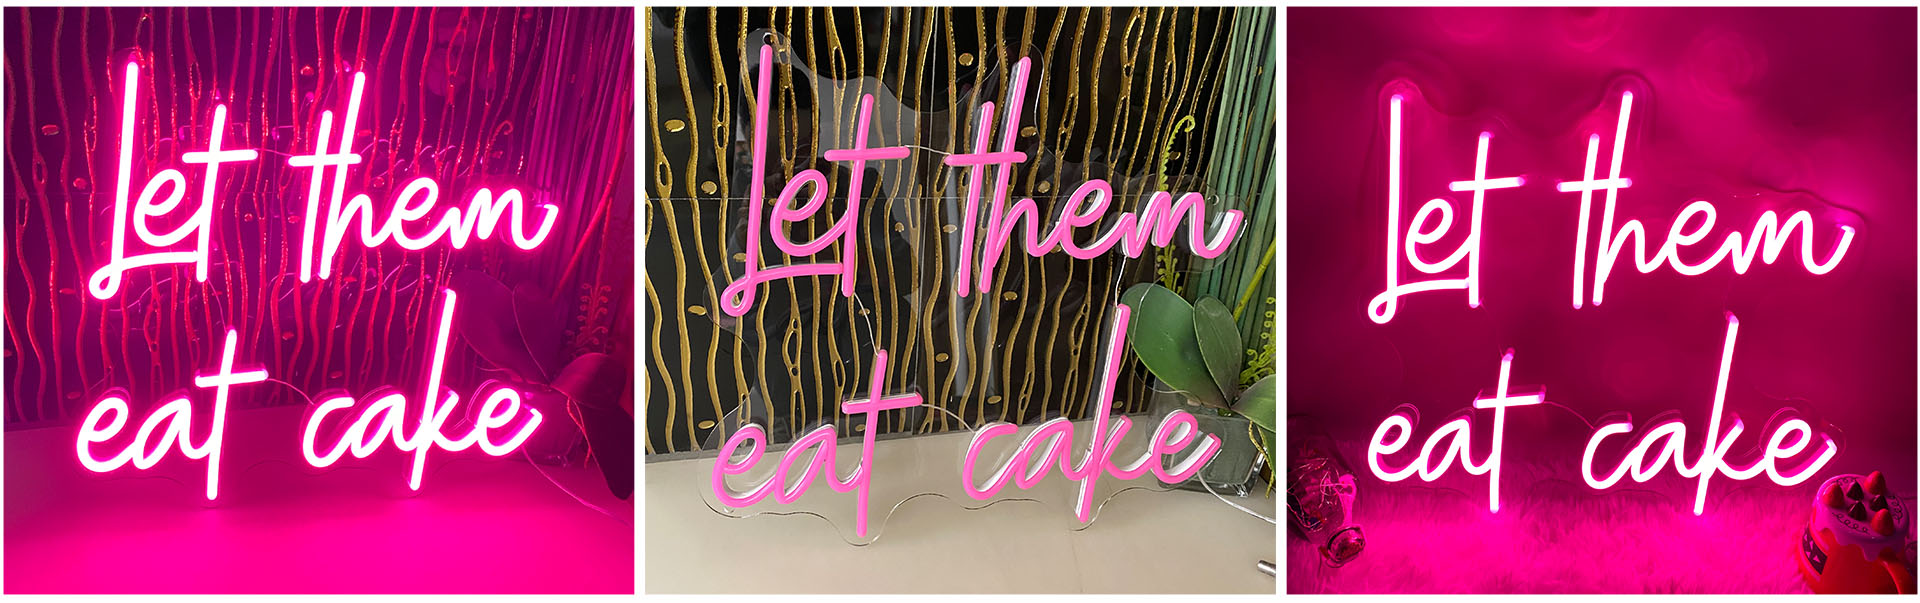 let them eat cake neon sign for cakeshop